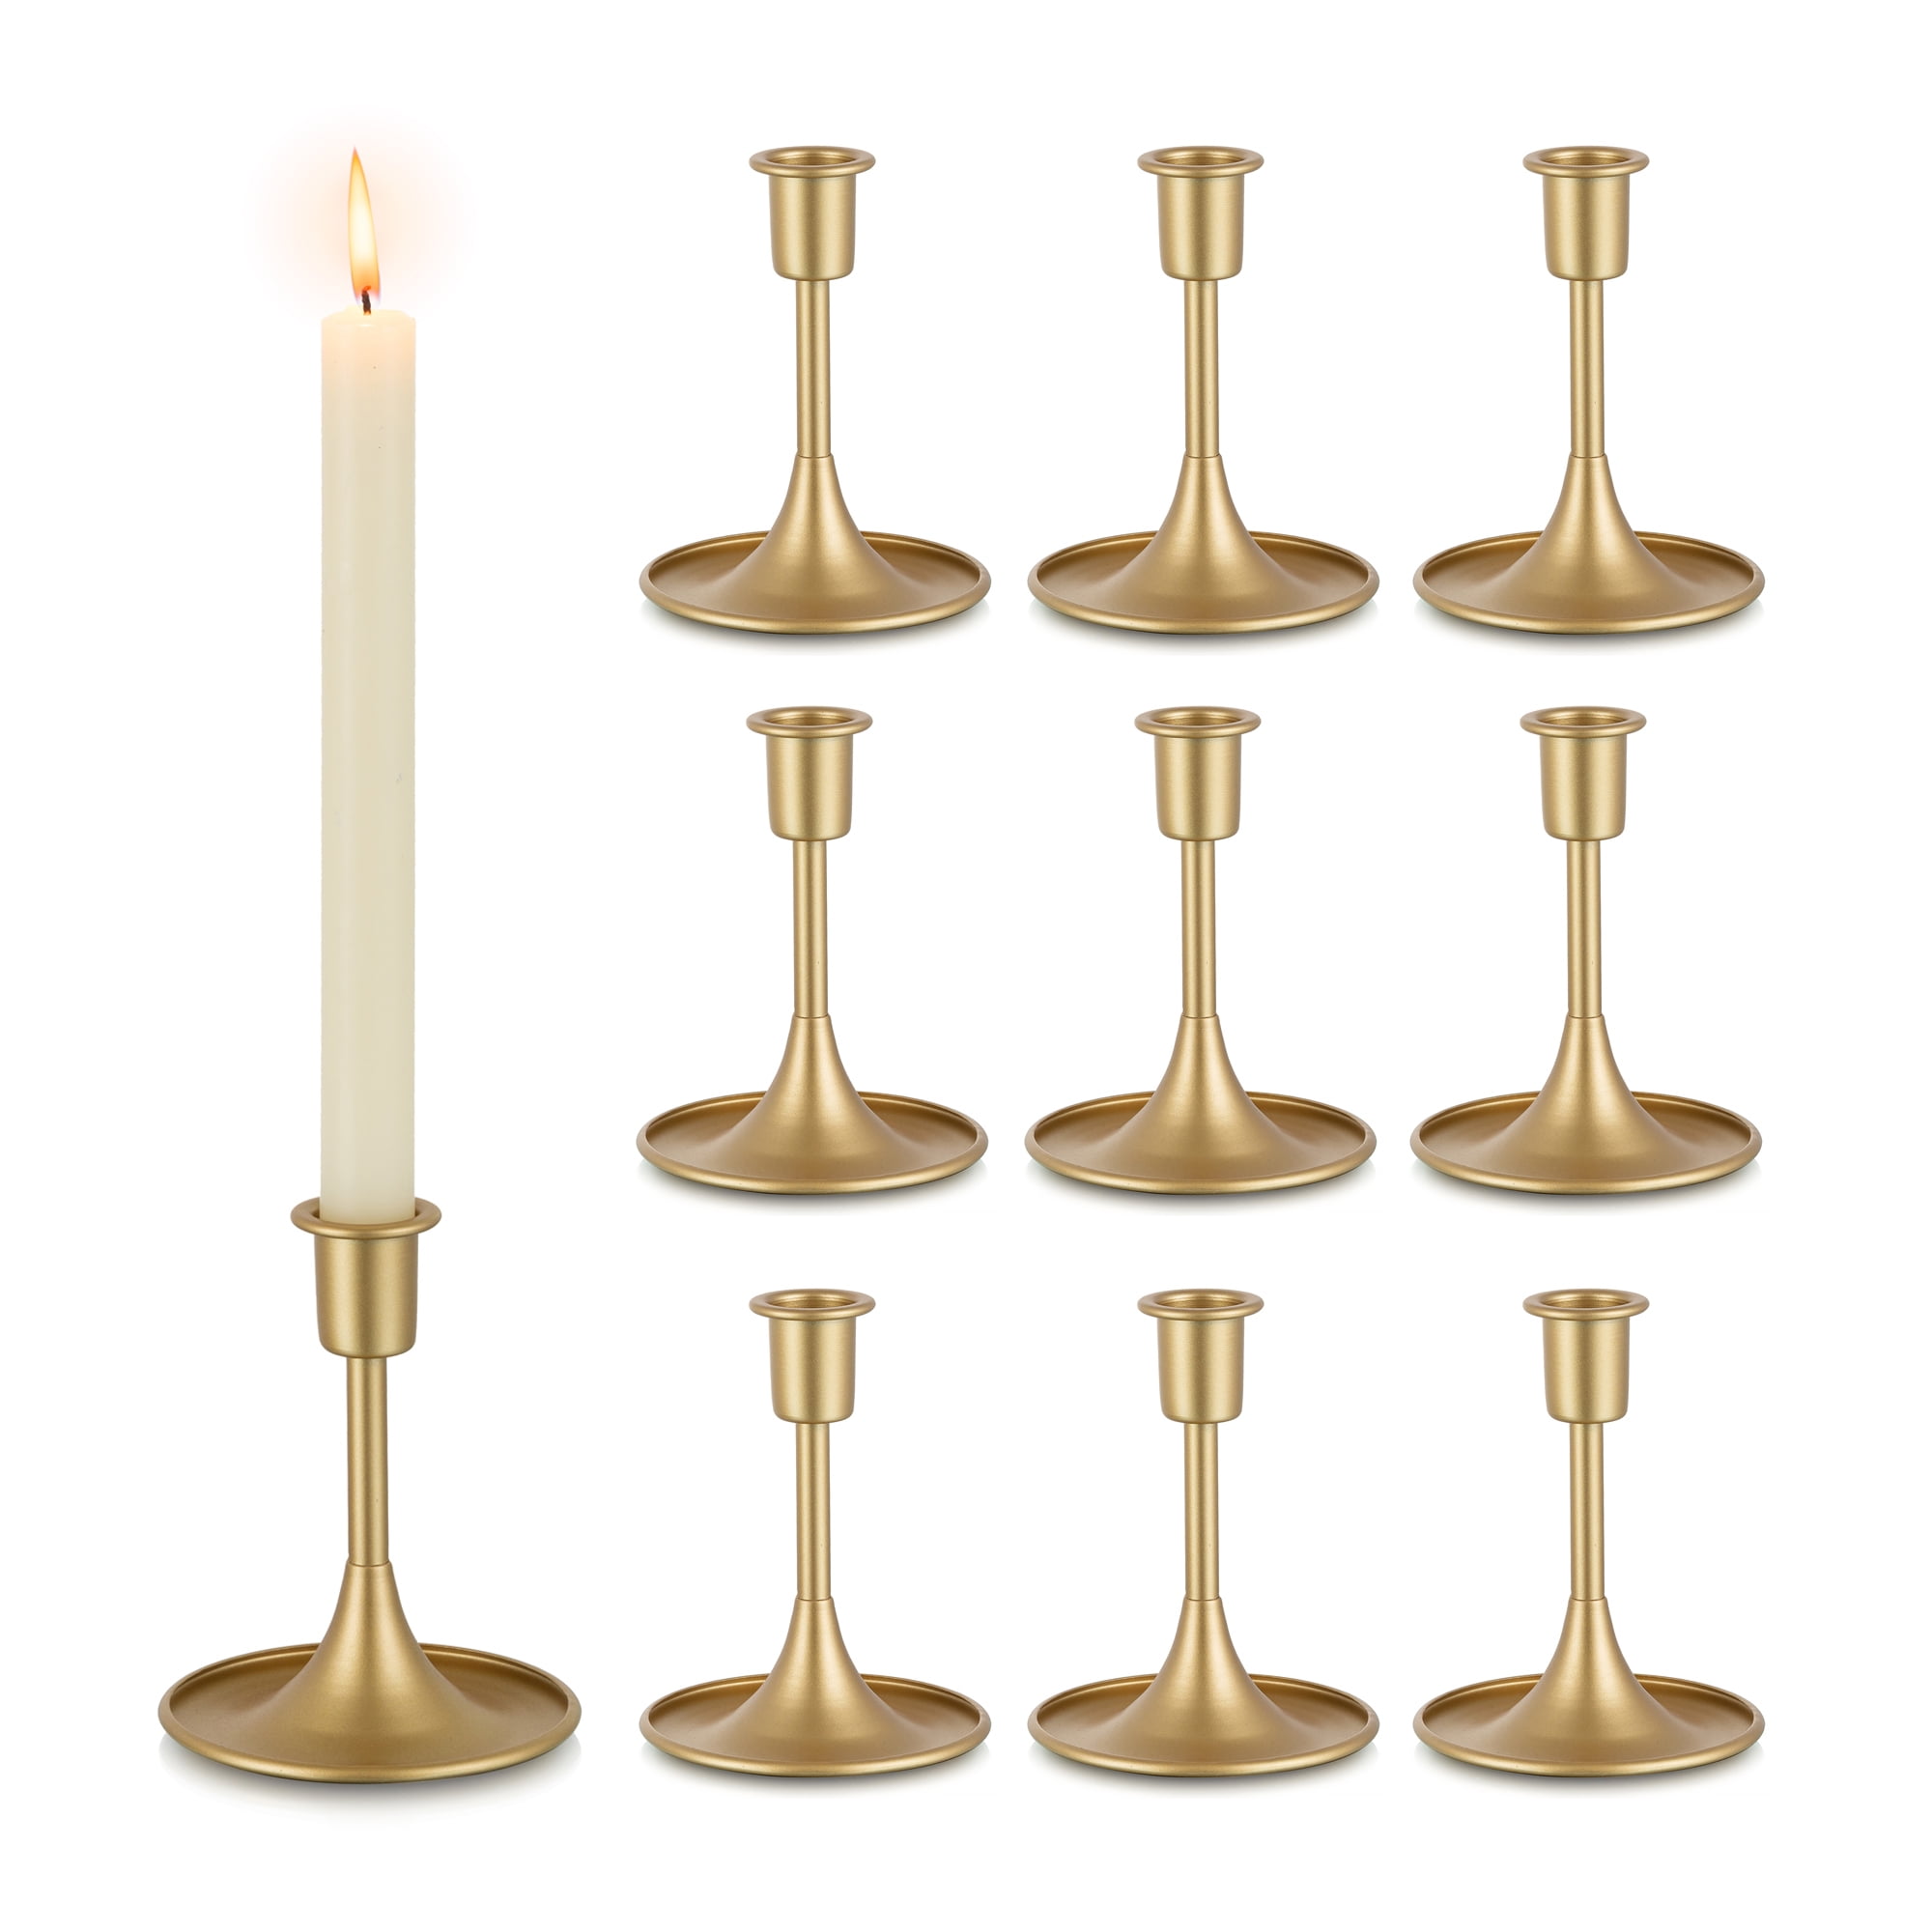 Gold Taper Candle Holder Set of 12, Hewory Short Skinny Brass Candlestick  Holders, Vintage Small Low Metal Candles Sticks for Wedding Centerpieces